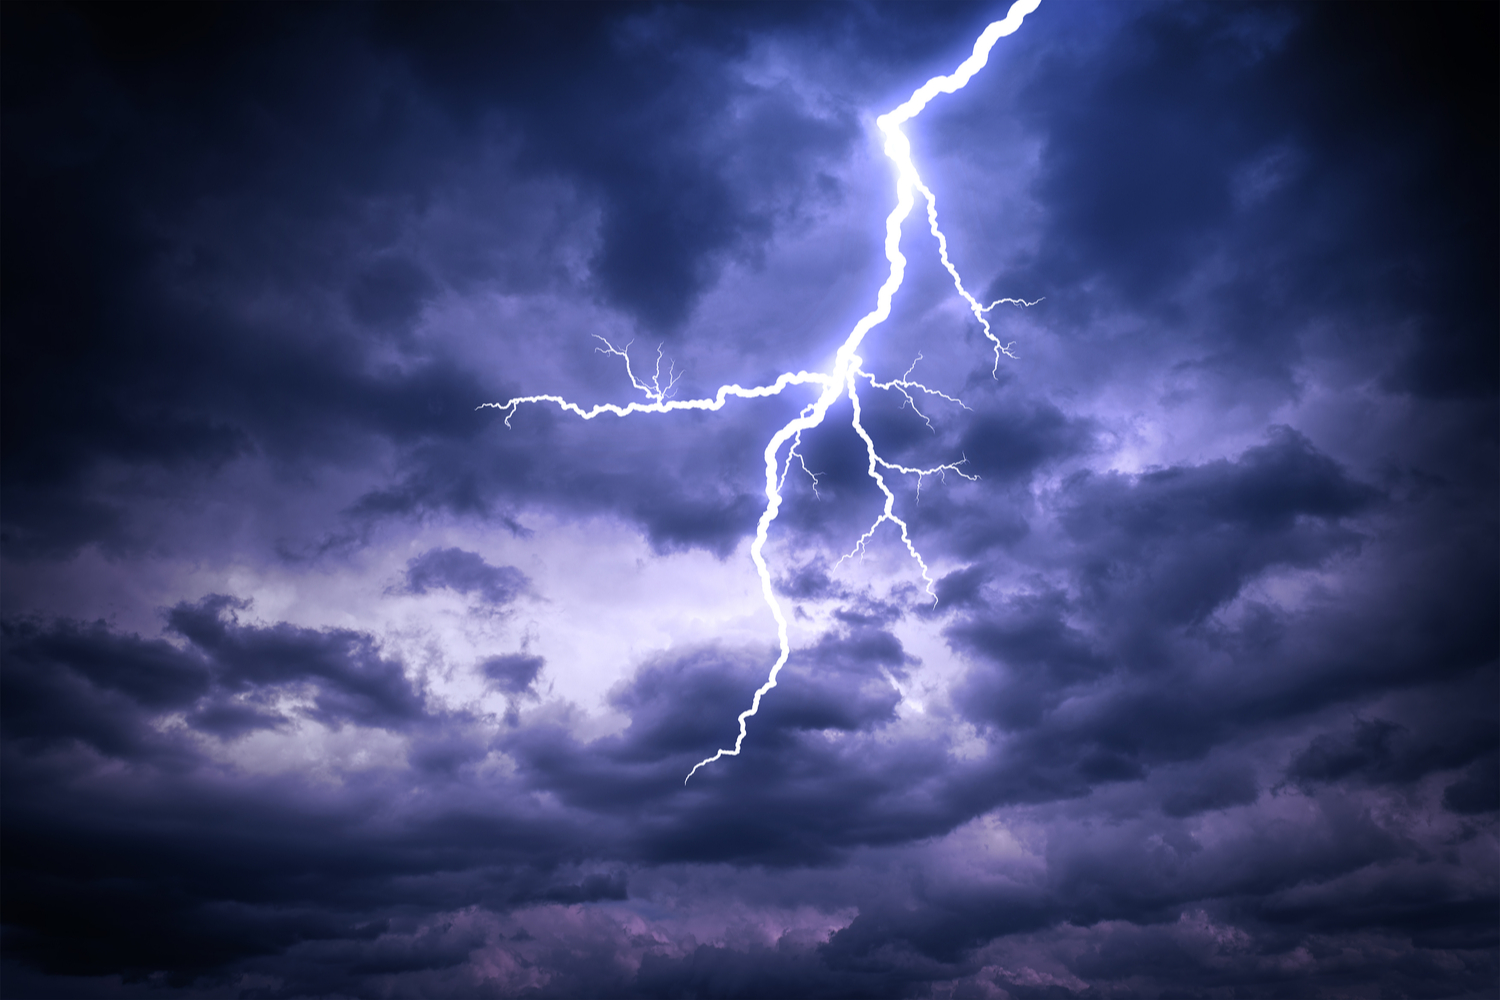 Lightning-Powered Blog Sees 20,000 Bitcoin Micropayments In 7 Months